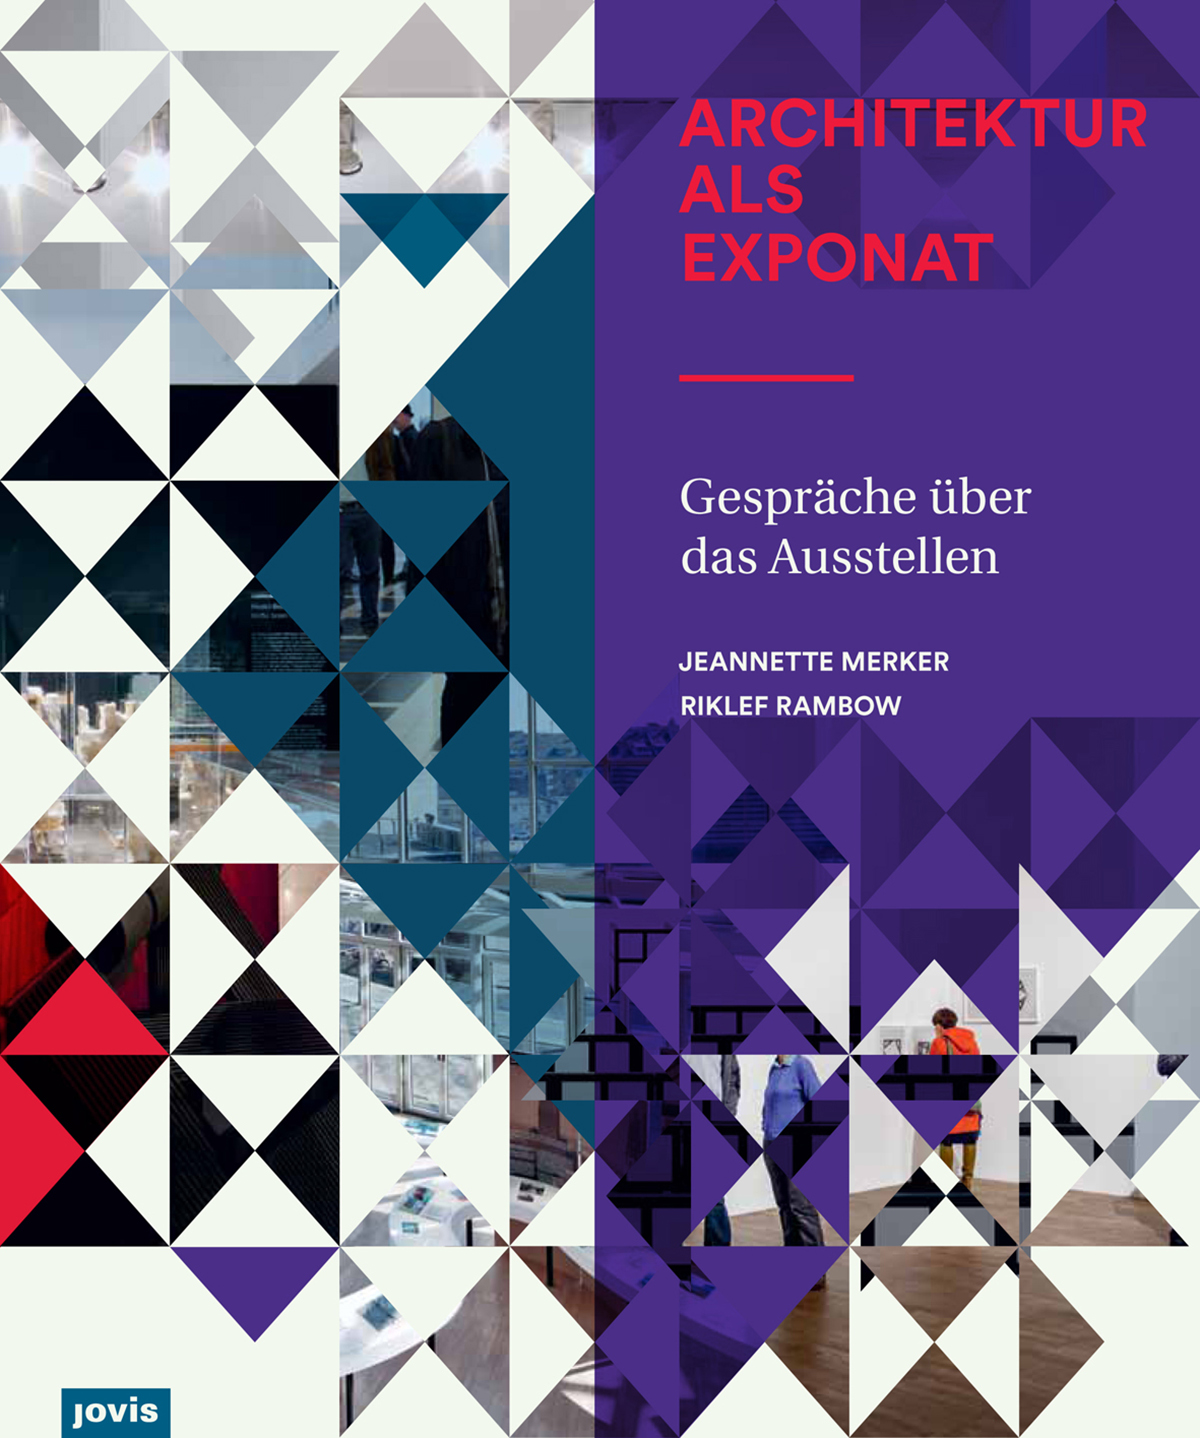 Cover photo for “The greatest potential lies in working with the third dimension – Jeannette Merker in conversation with Ulrich Müller”